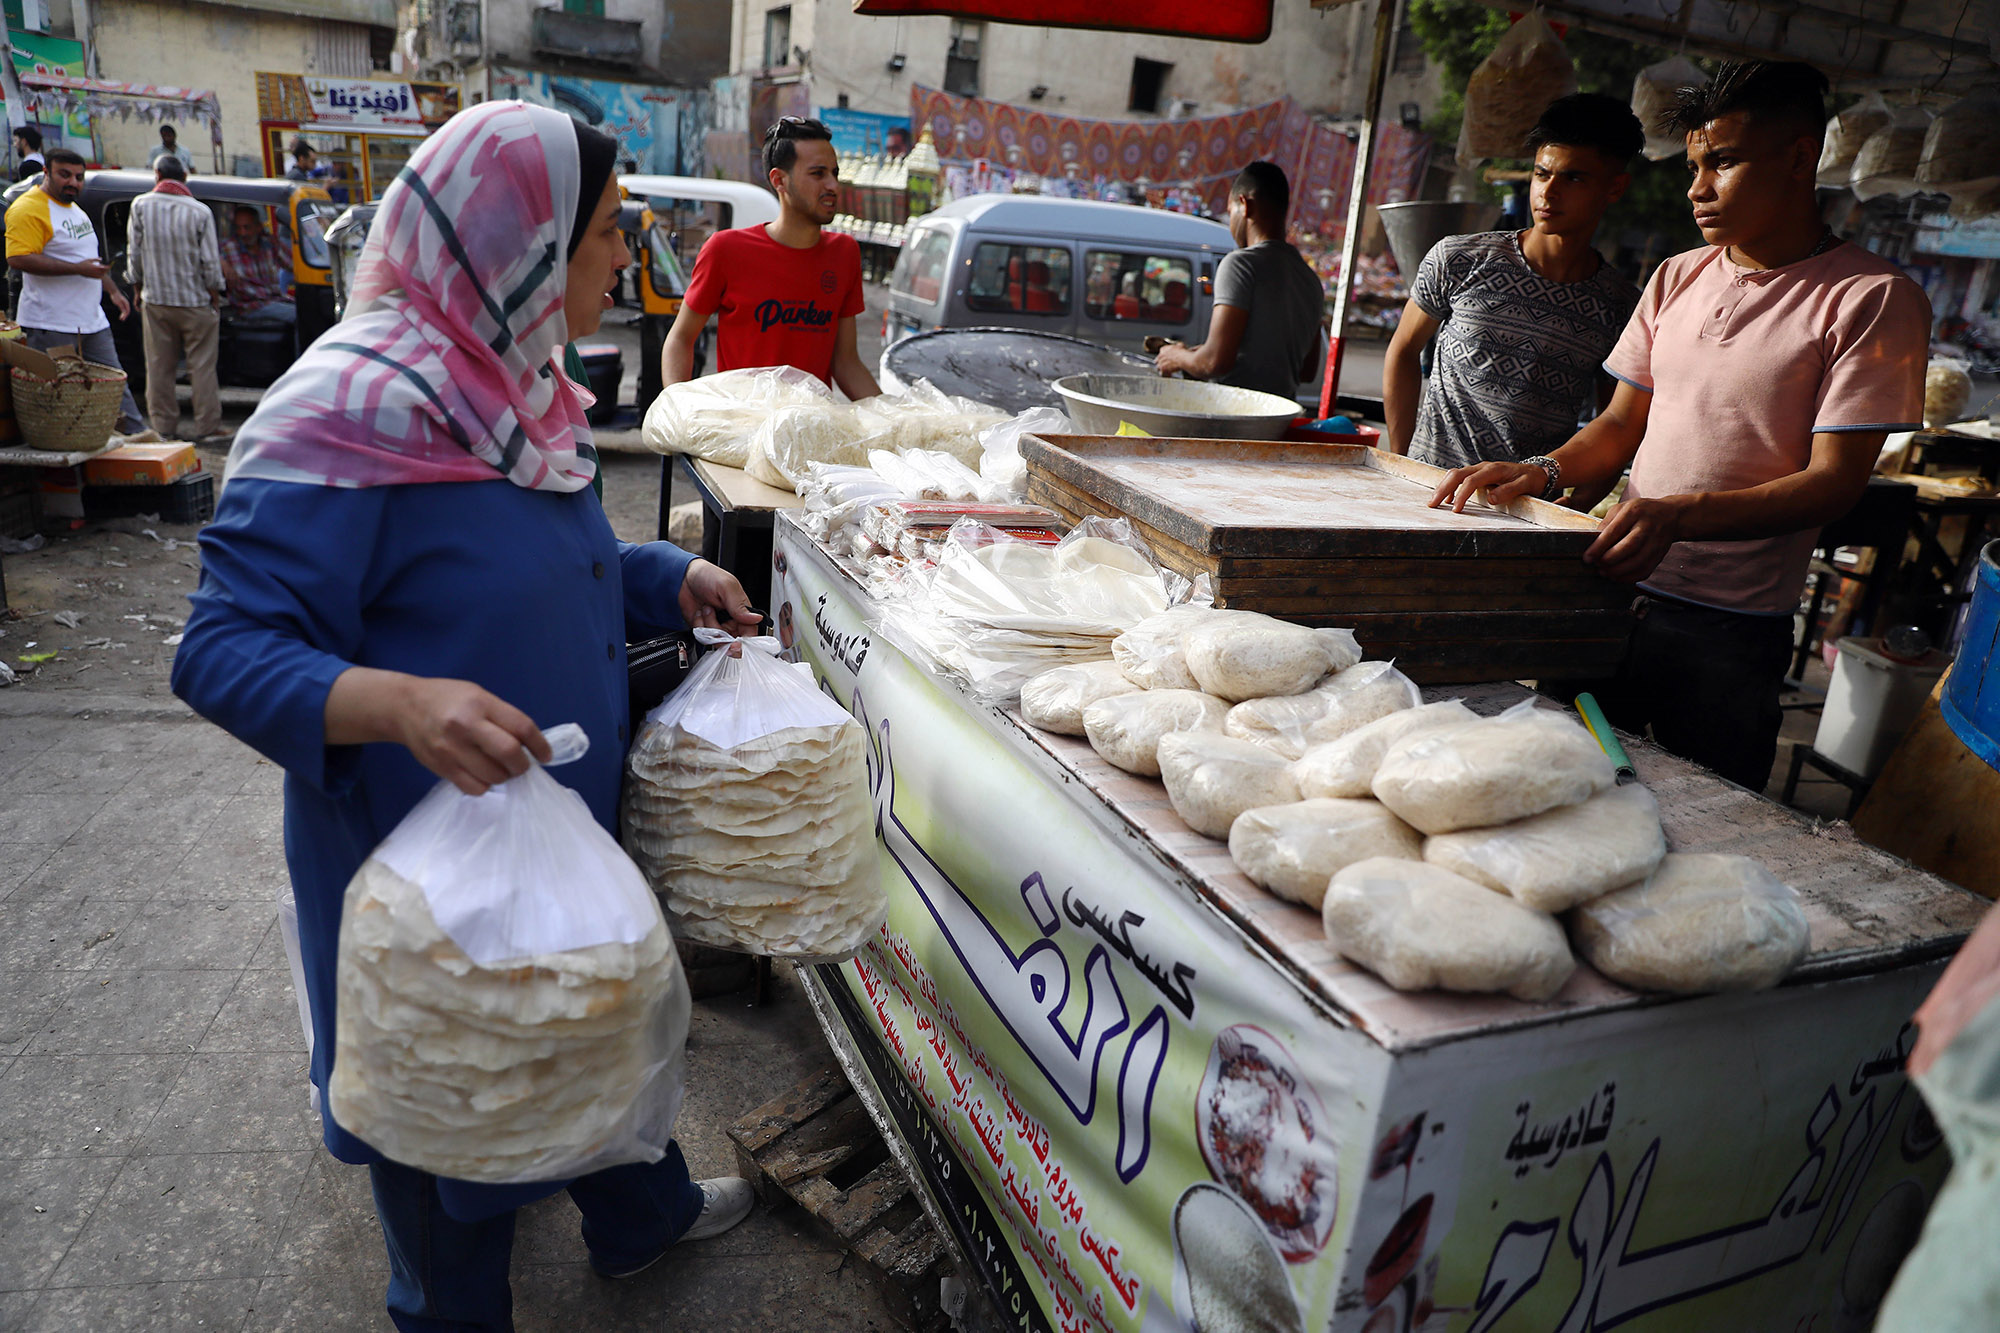 As Ramadan looms, Moroccans struggle to cope with rising prices